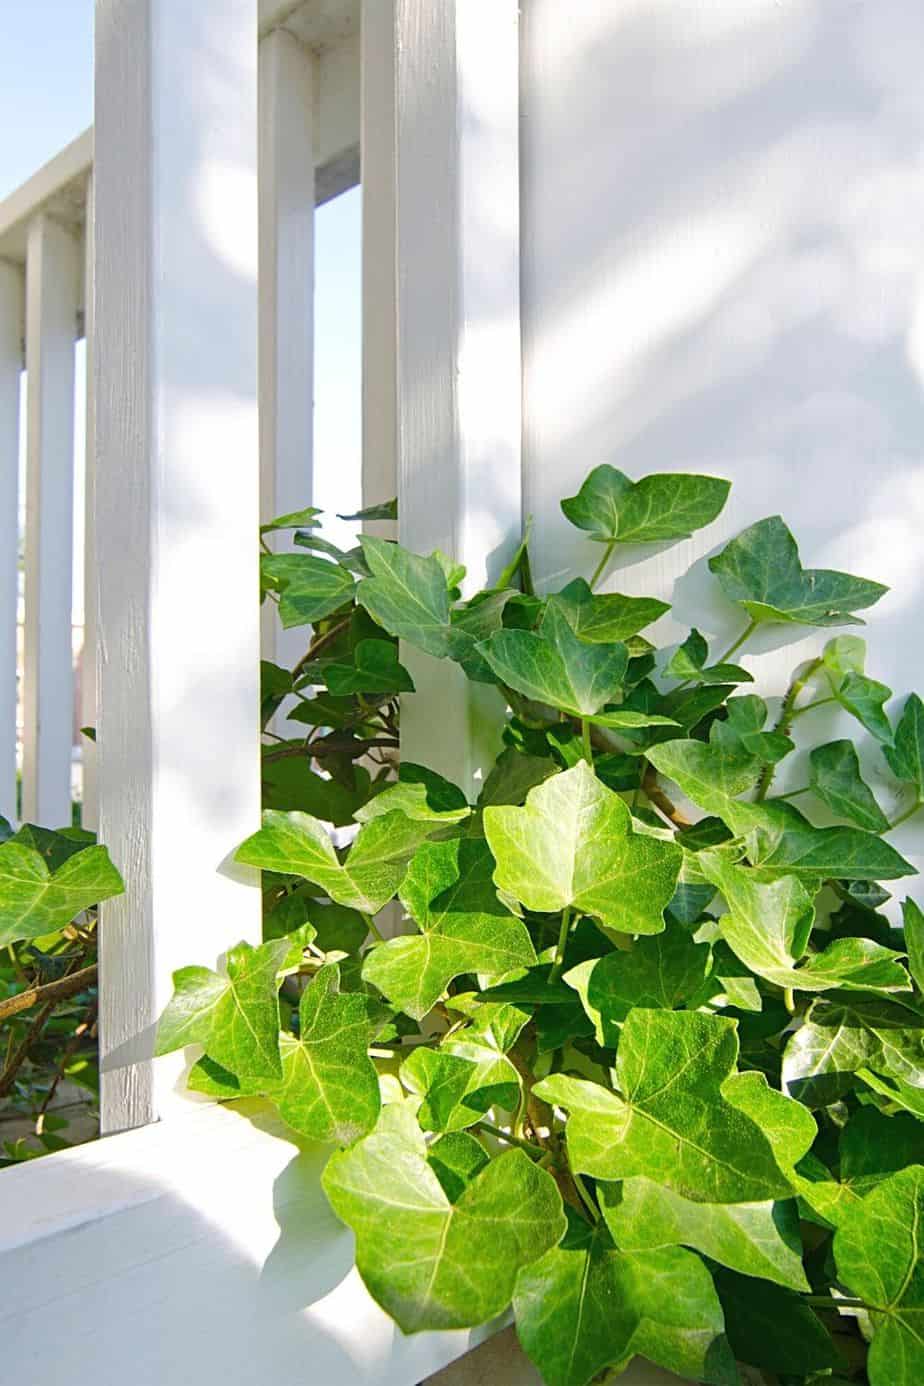 English Ivy is another plant that you can place in a vase for prolonged periods